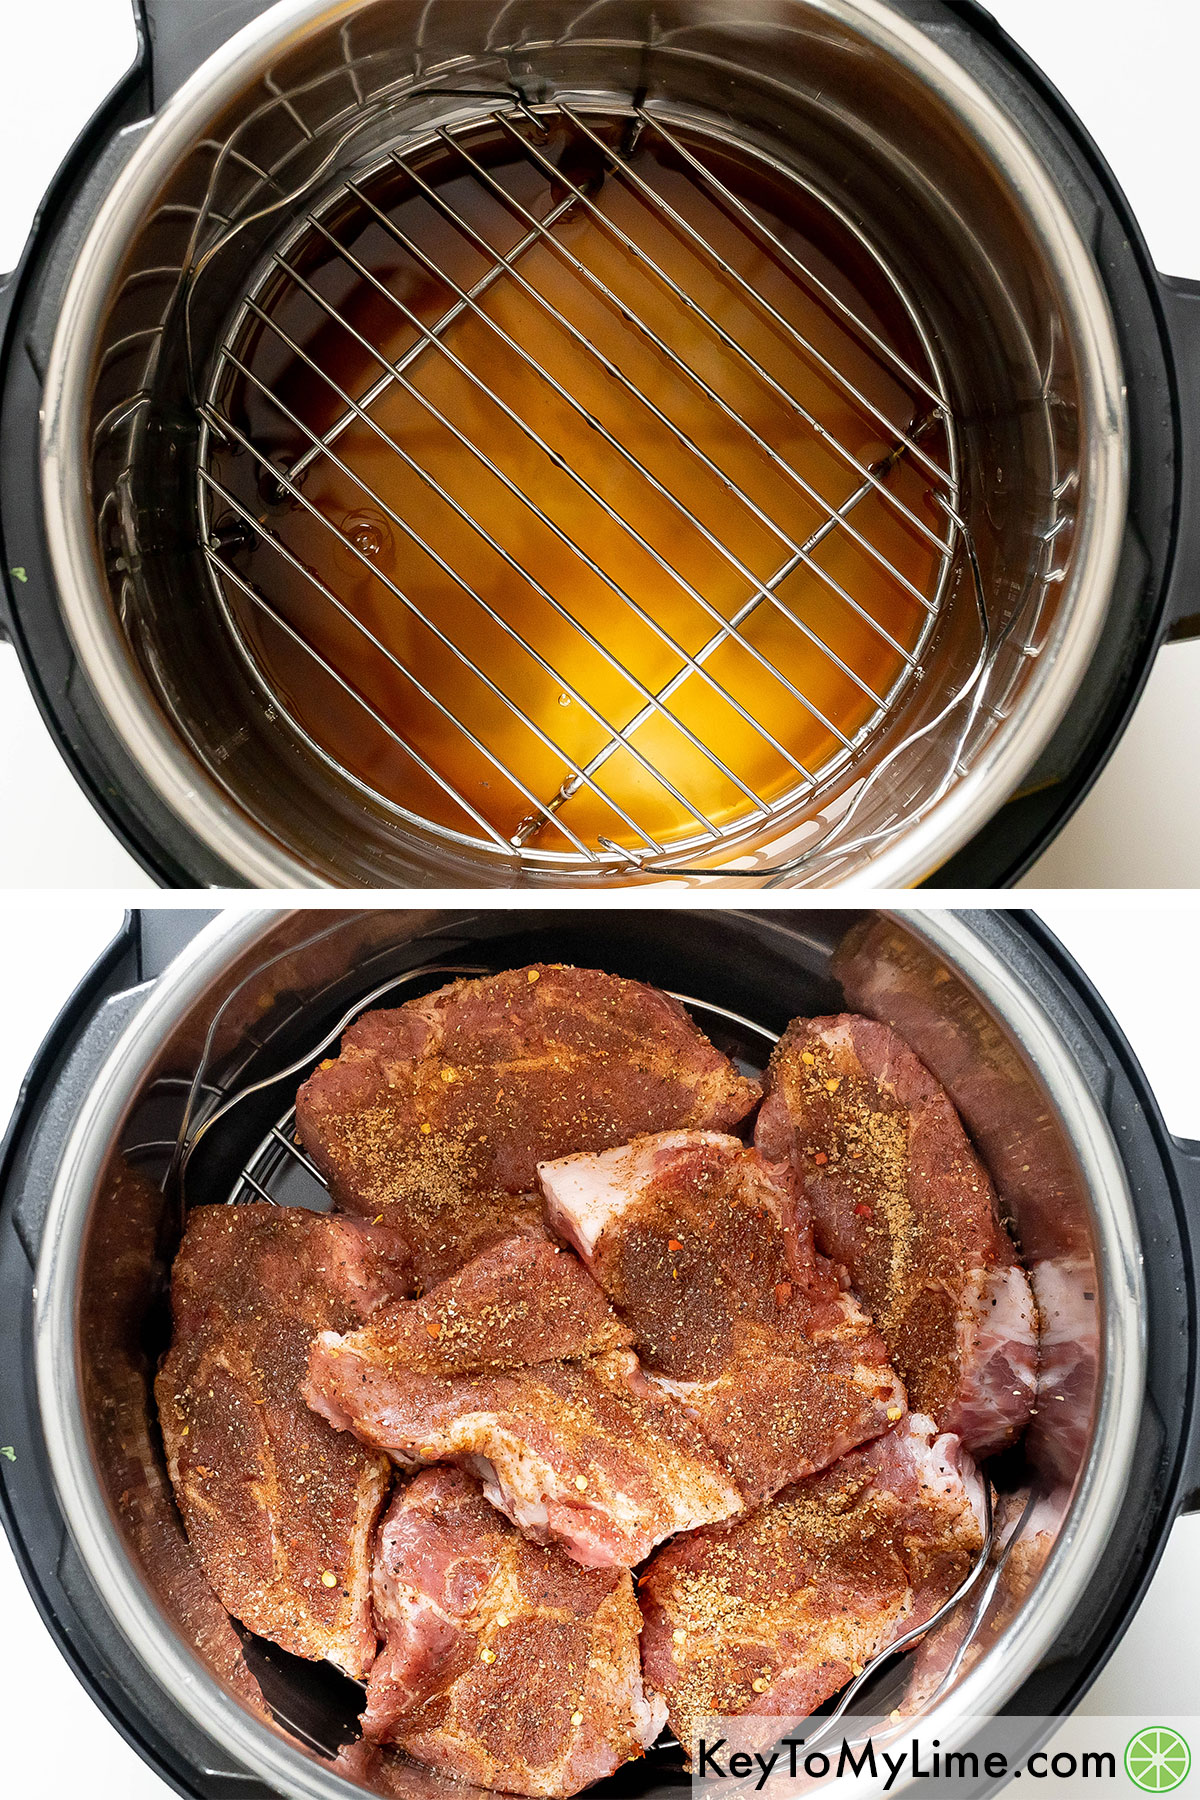 Adding broth, trivet, and seasoned country style ribs to an Instant Pot.